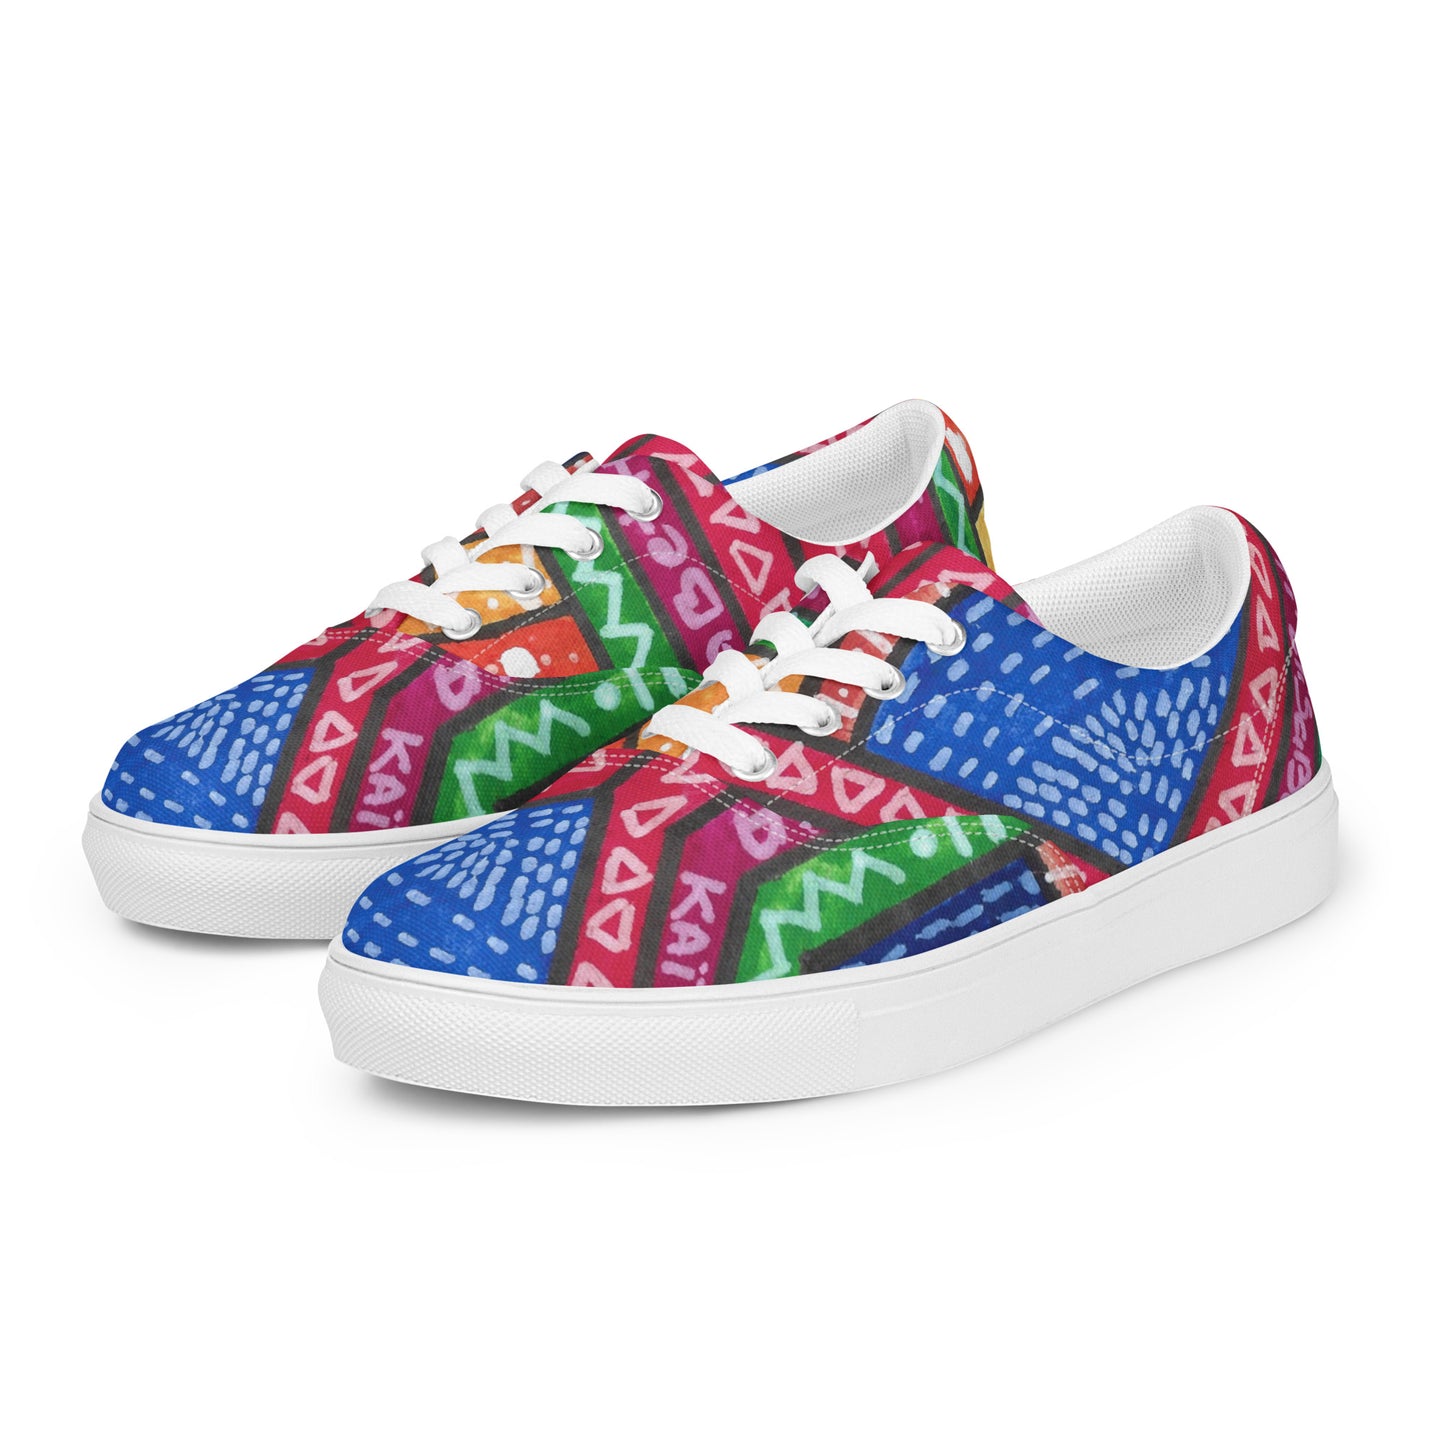 TIYI - Men's canvas trainers with laces